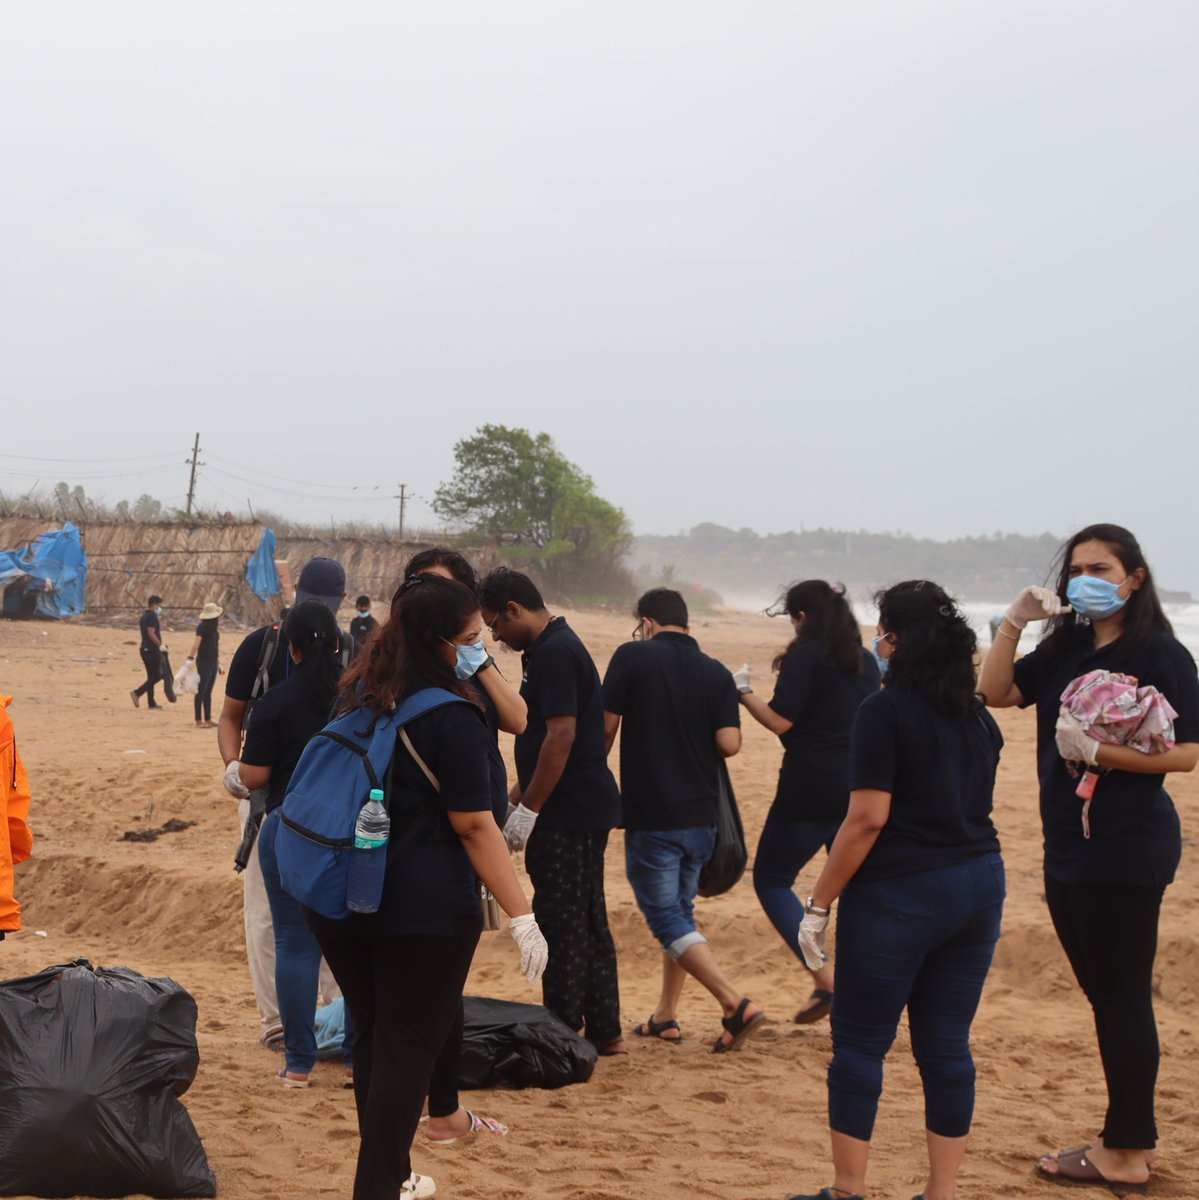 Q.Why Beach Cleanups Matter?
.
A. Preserving Coastal Ecosystems: Beach cleanups help maintain the delicate balance of coastal ecosystems. Litter can smother coral reefs, damage sea grass beds, and disrupt nesting habitats for shorebirds. #beachcleanup